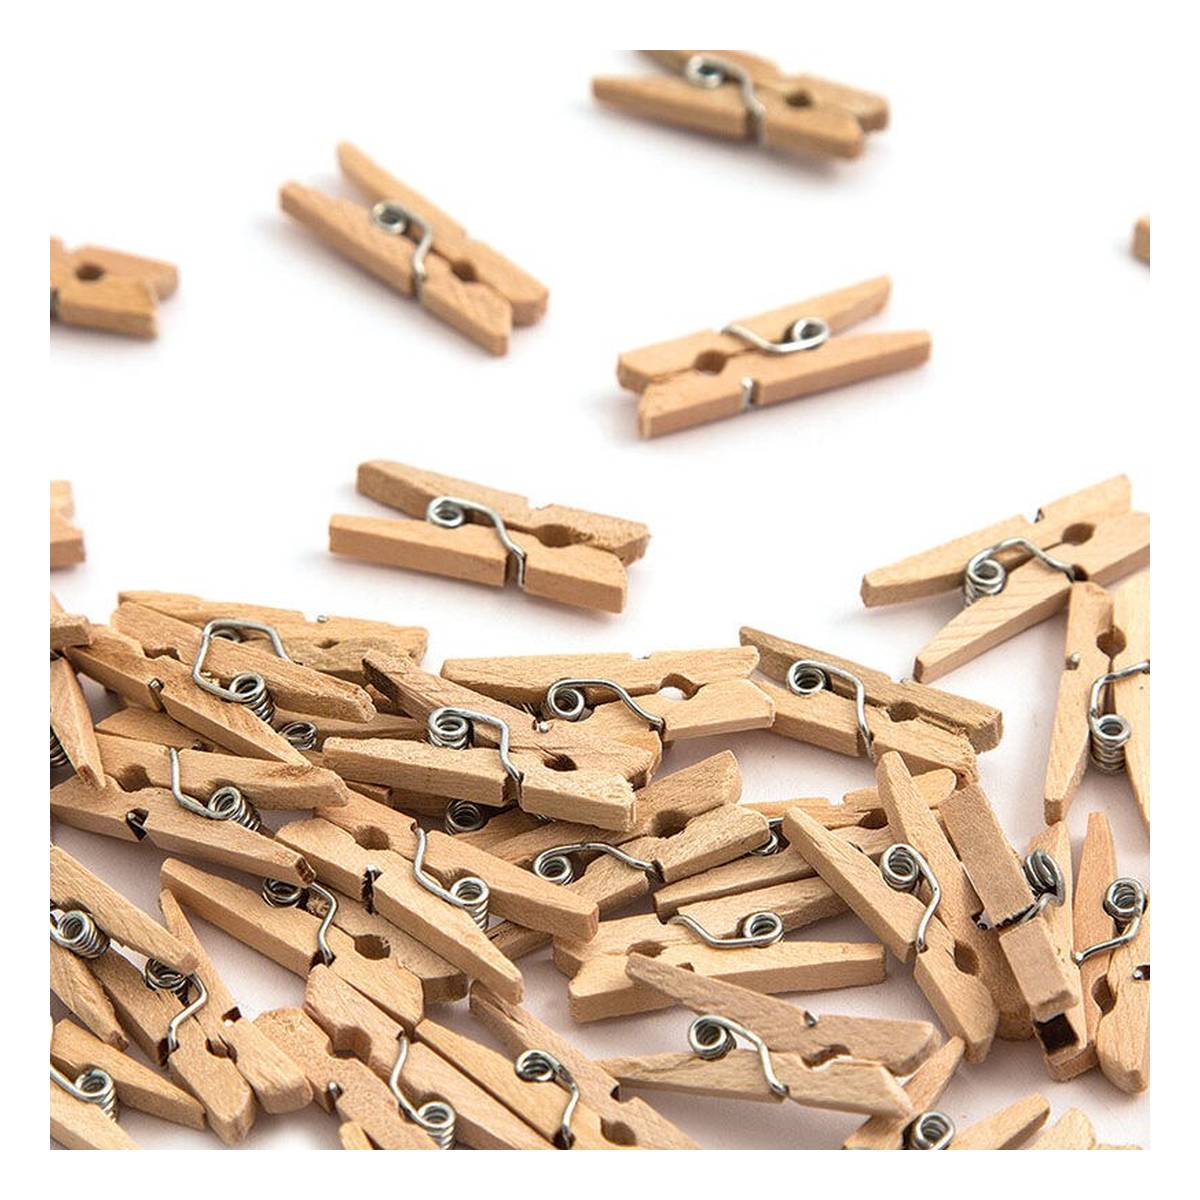 atnight Mini Wooden Pegs,Mini Pegs for Decorative Photo Wall Weddings & Events 150 Pcs DIY Decorations Tiny Pegs for Arts and Crafts Wooden Clothes Pegs 